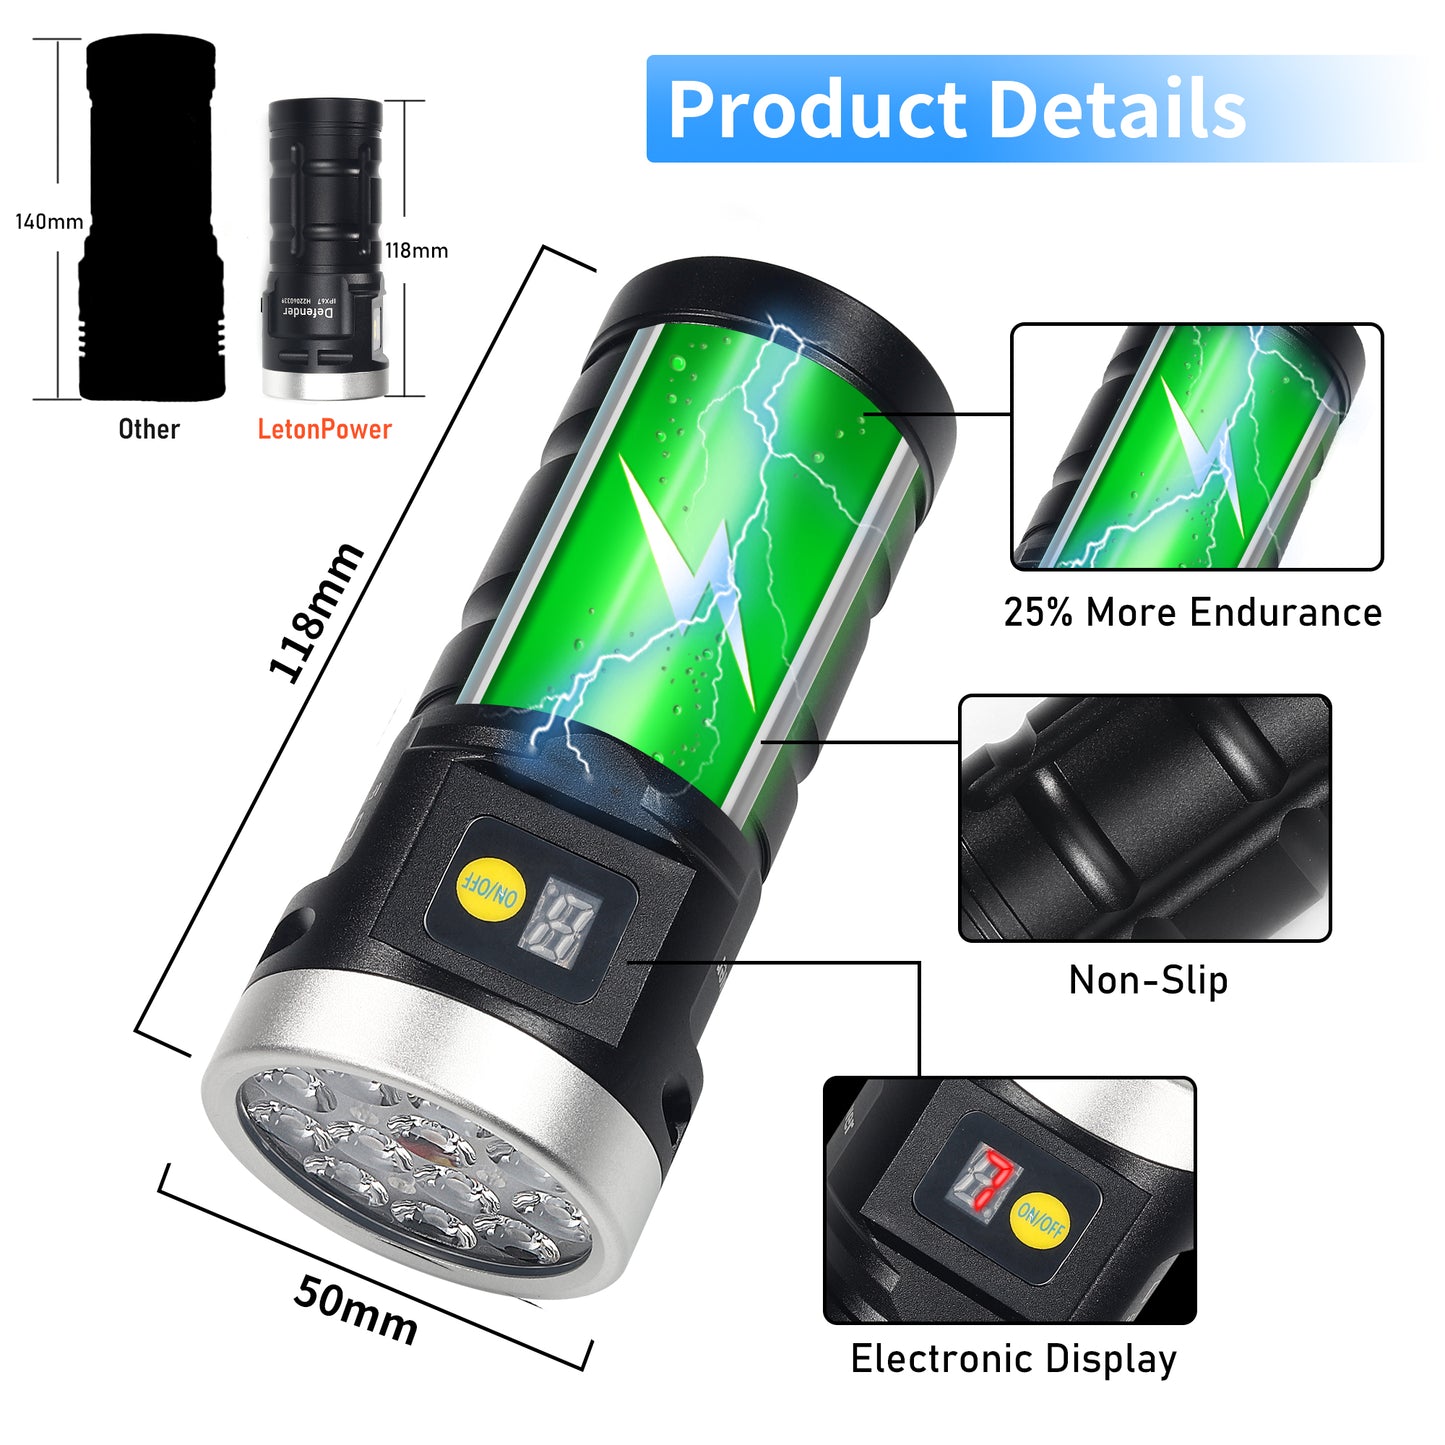 LetonPower Rechargeable LED Flashlights 5000 Lumen Super Bright flashlights,with Type-C Rechargeable flashlights Flashlight,flashlights high lumens, for Fire First Aid and Outdoor Activity